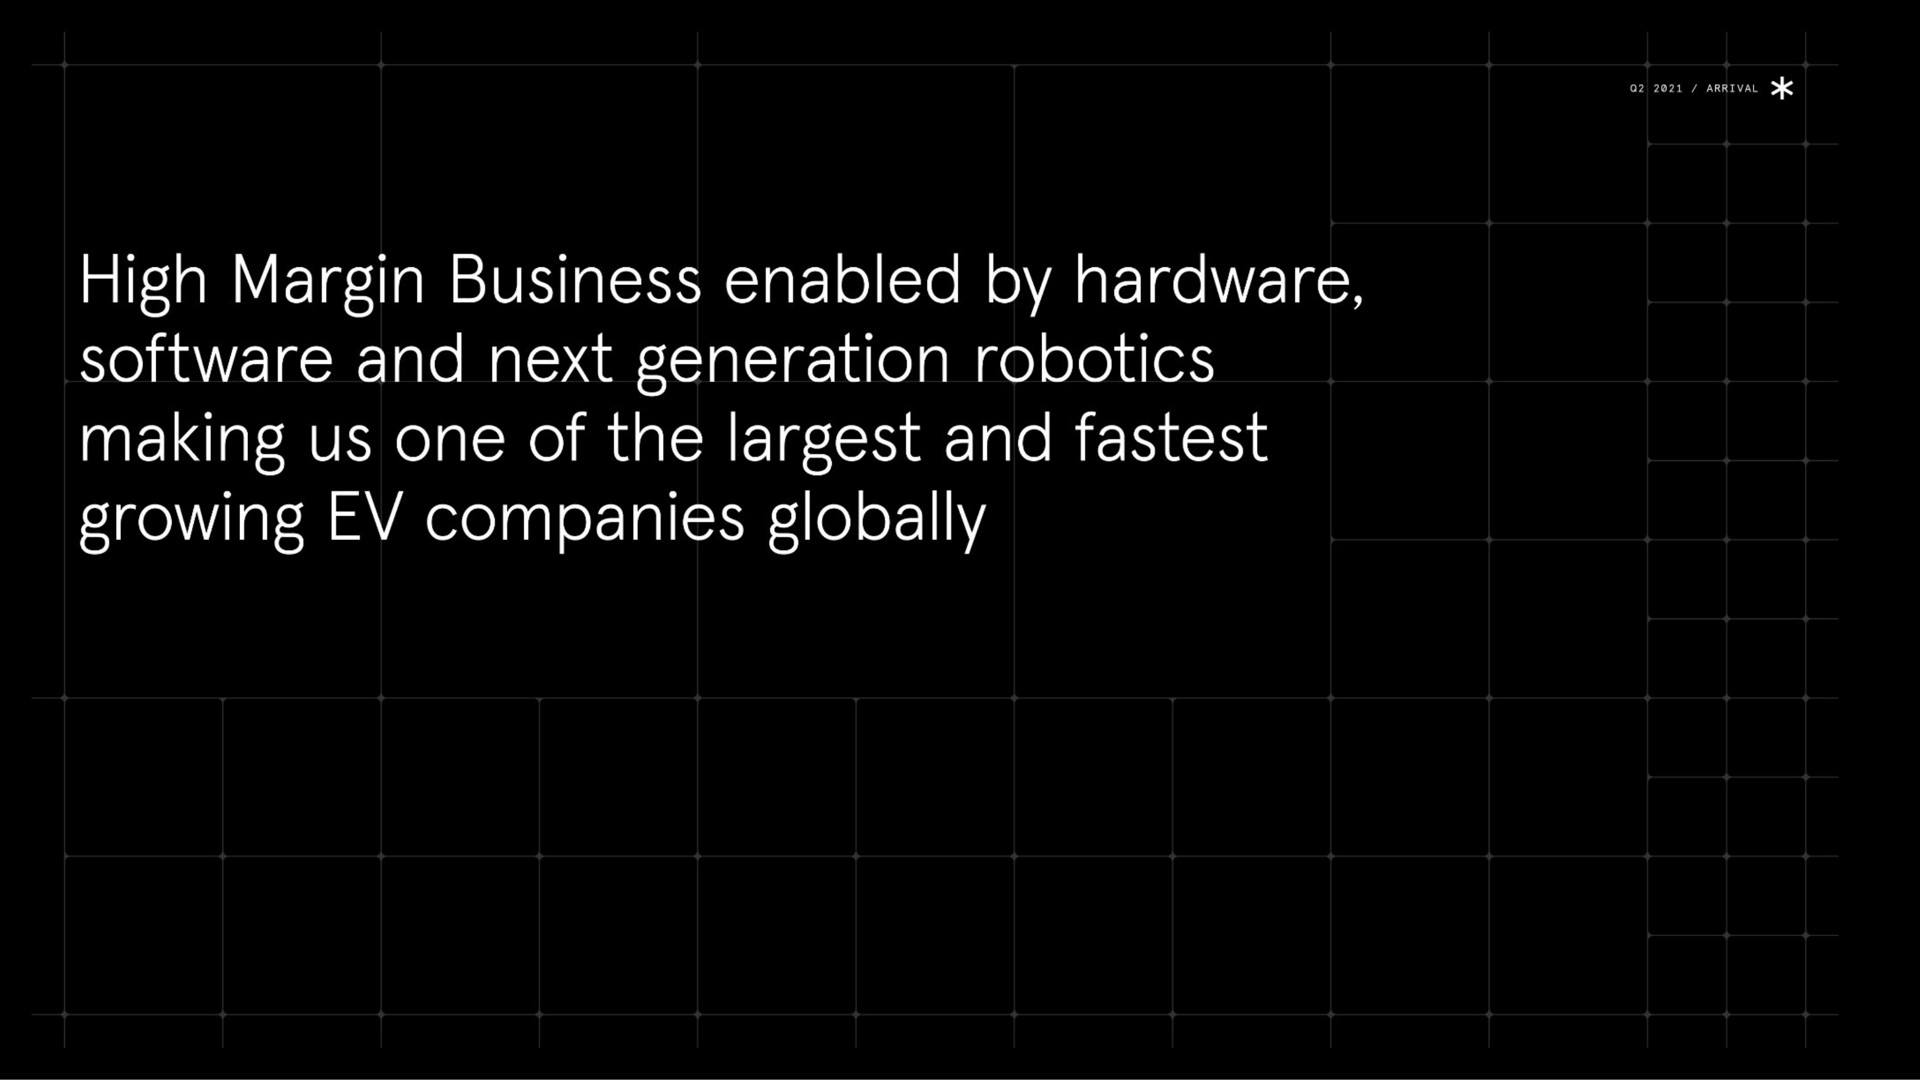 high margin business enabled by hardware and next generation making us one of the and growing companies globally | Arrival